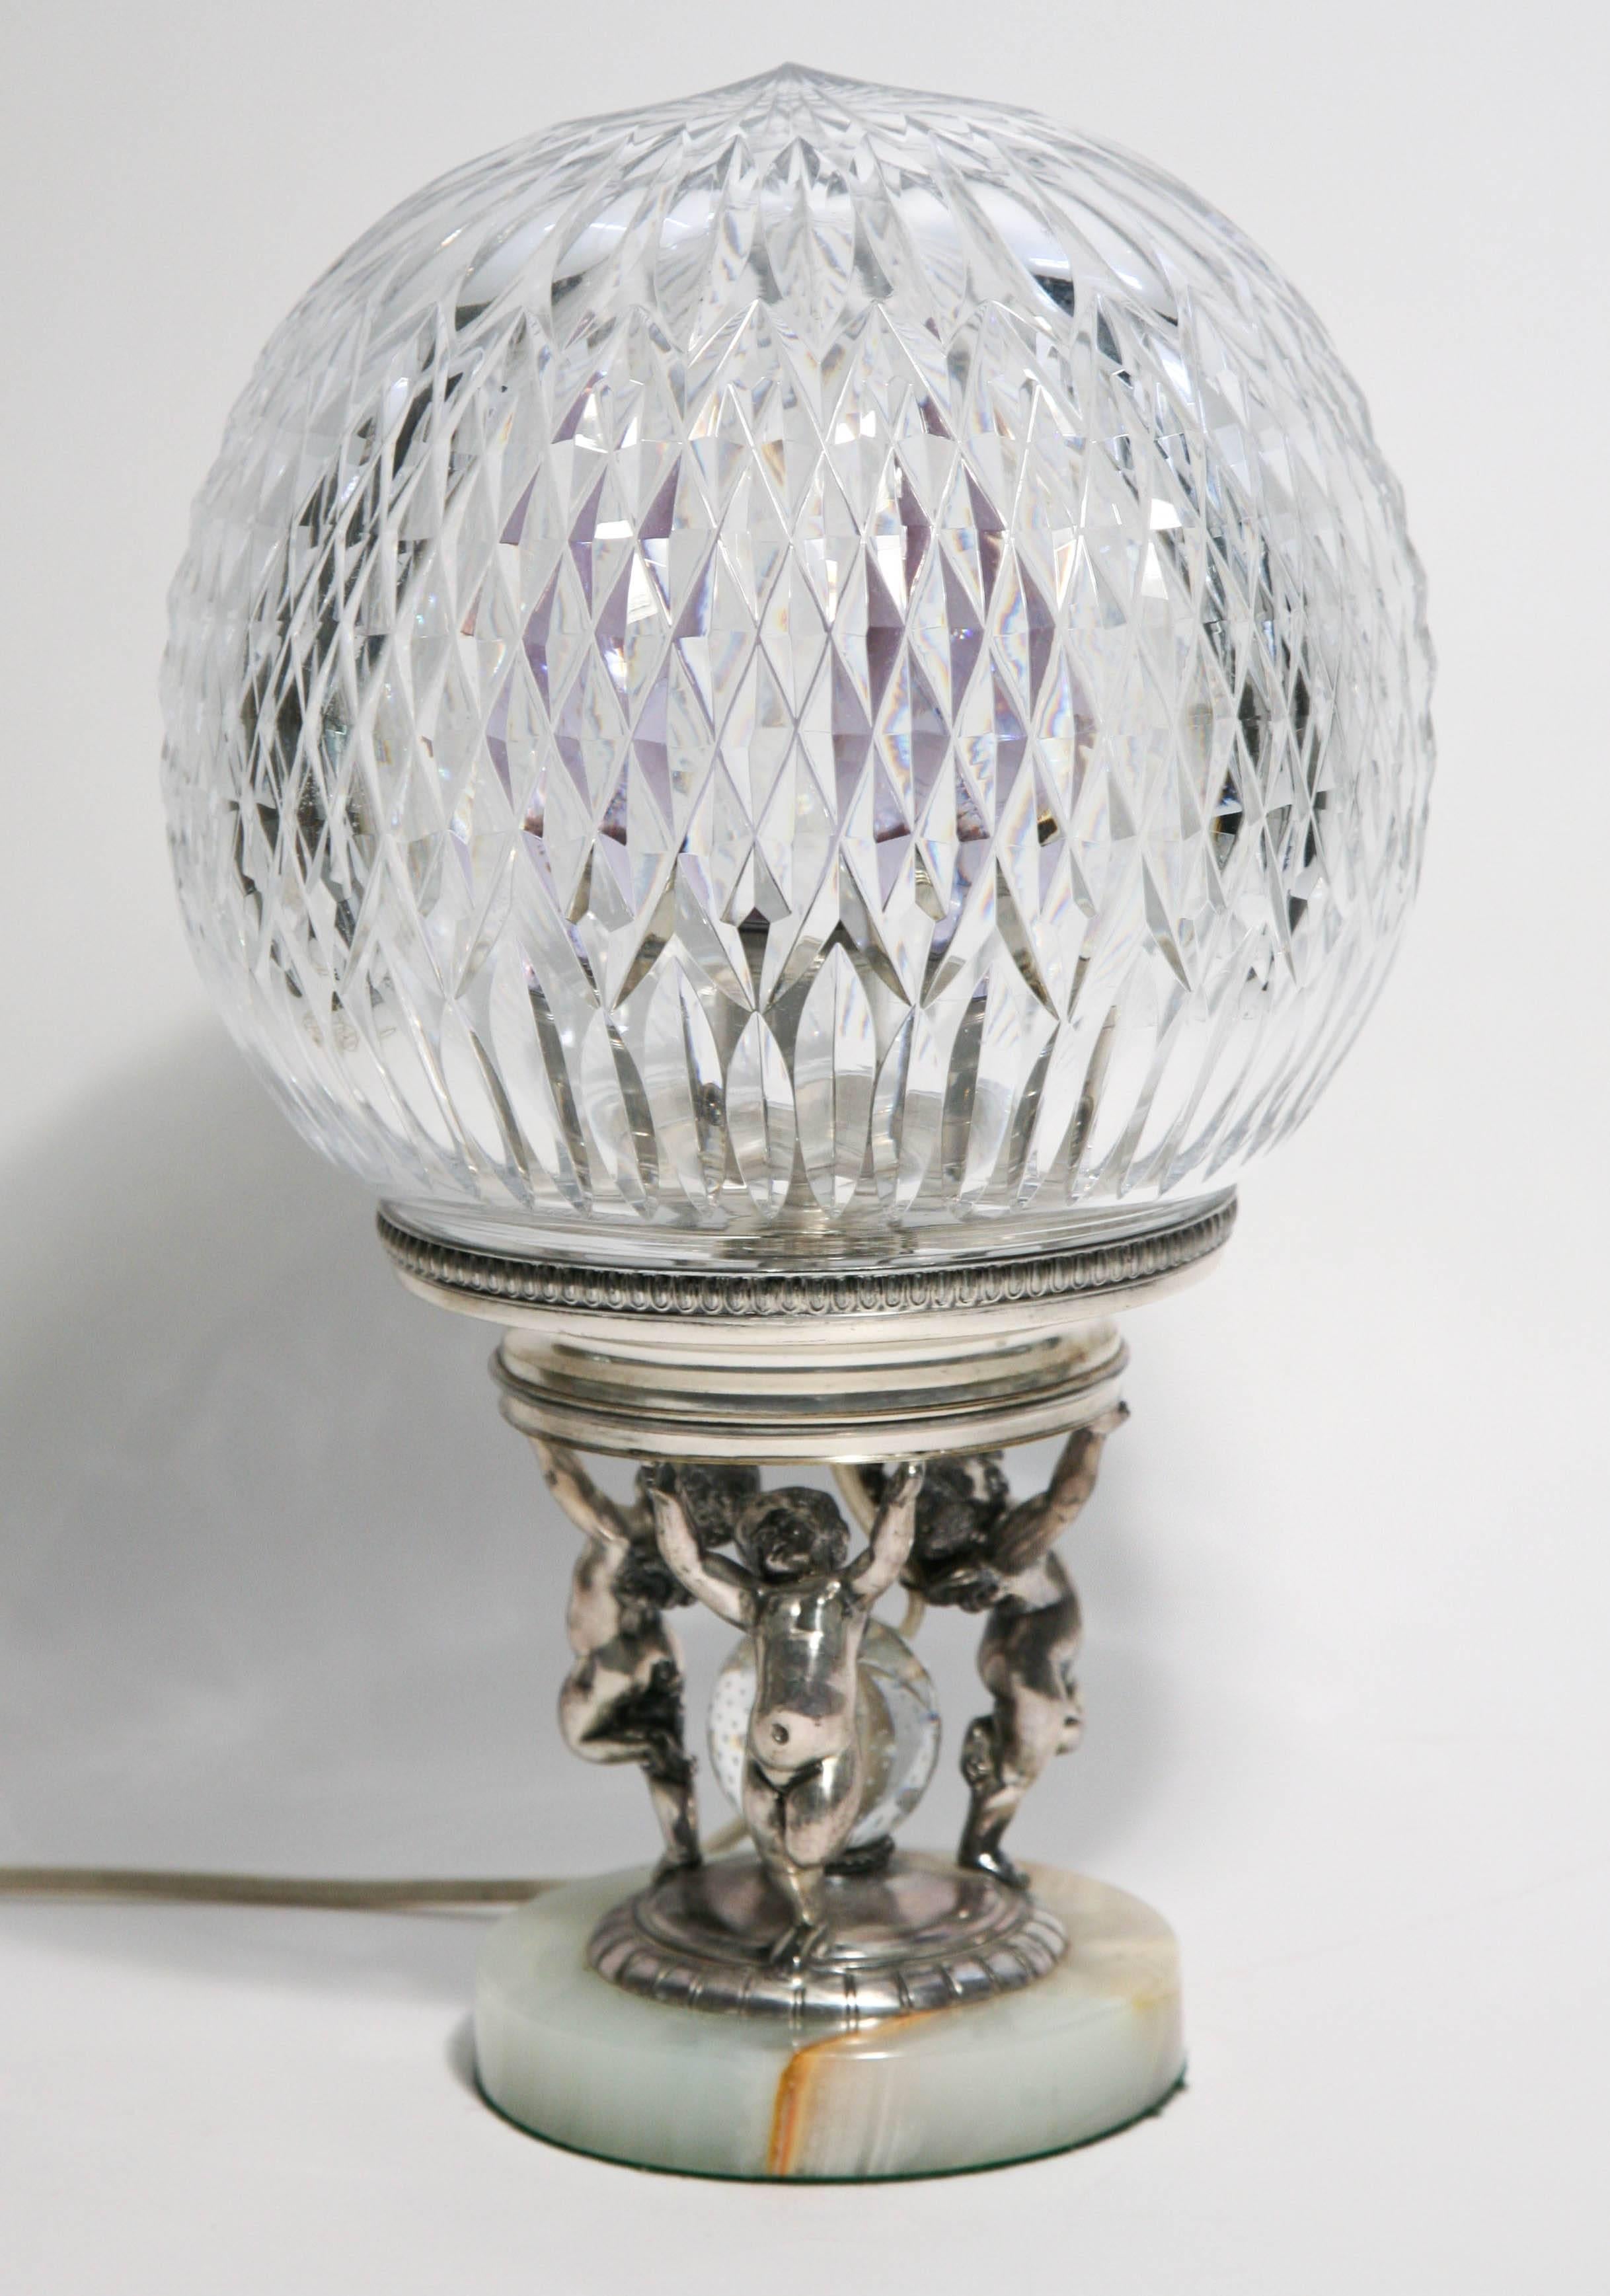 A rare and hard to find all original piece by one of America's storied cut glass and metalwork’s firm of Pairpoint, New Bedford MA. A fully cut crystal globe rests on a hand crafted silver plated base of three figural ptti supporting their treasure.